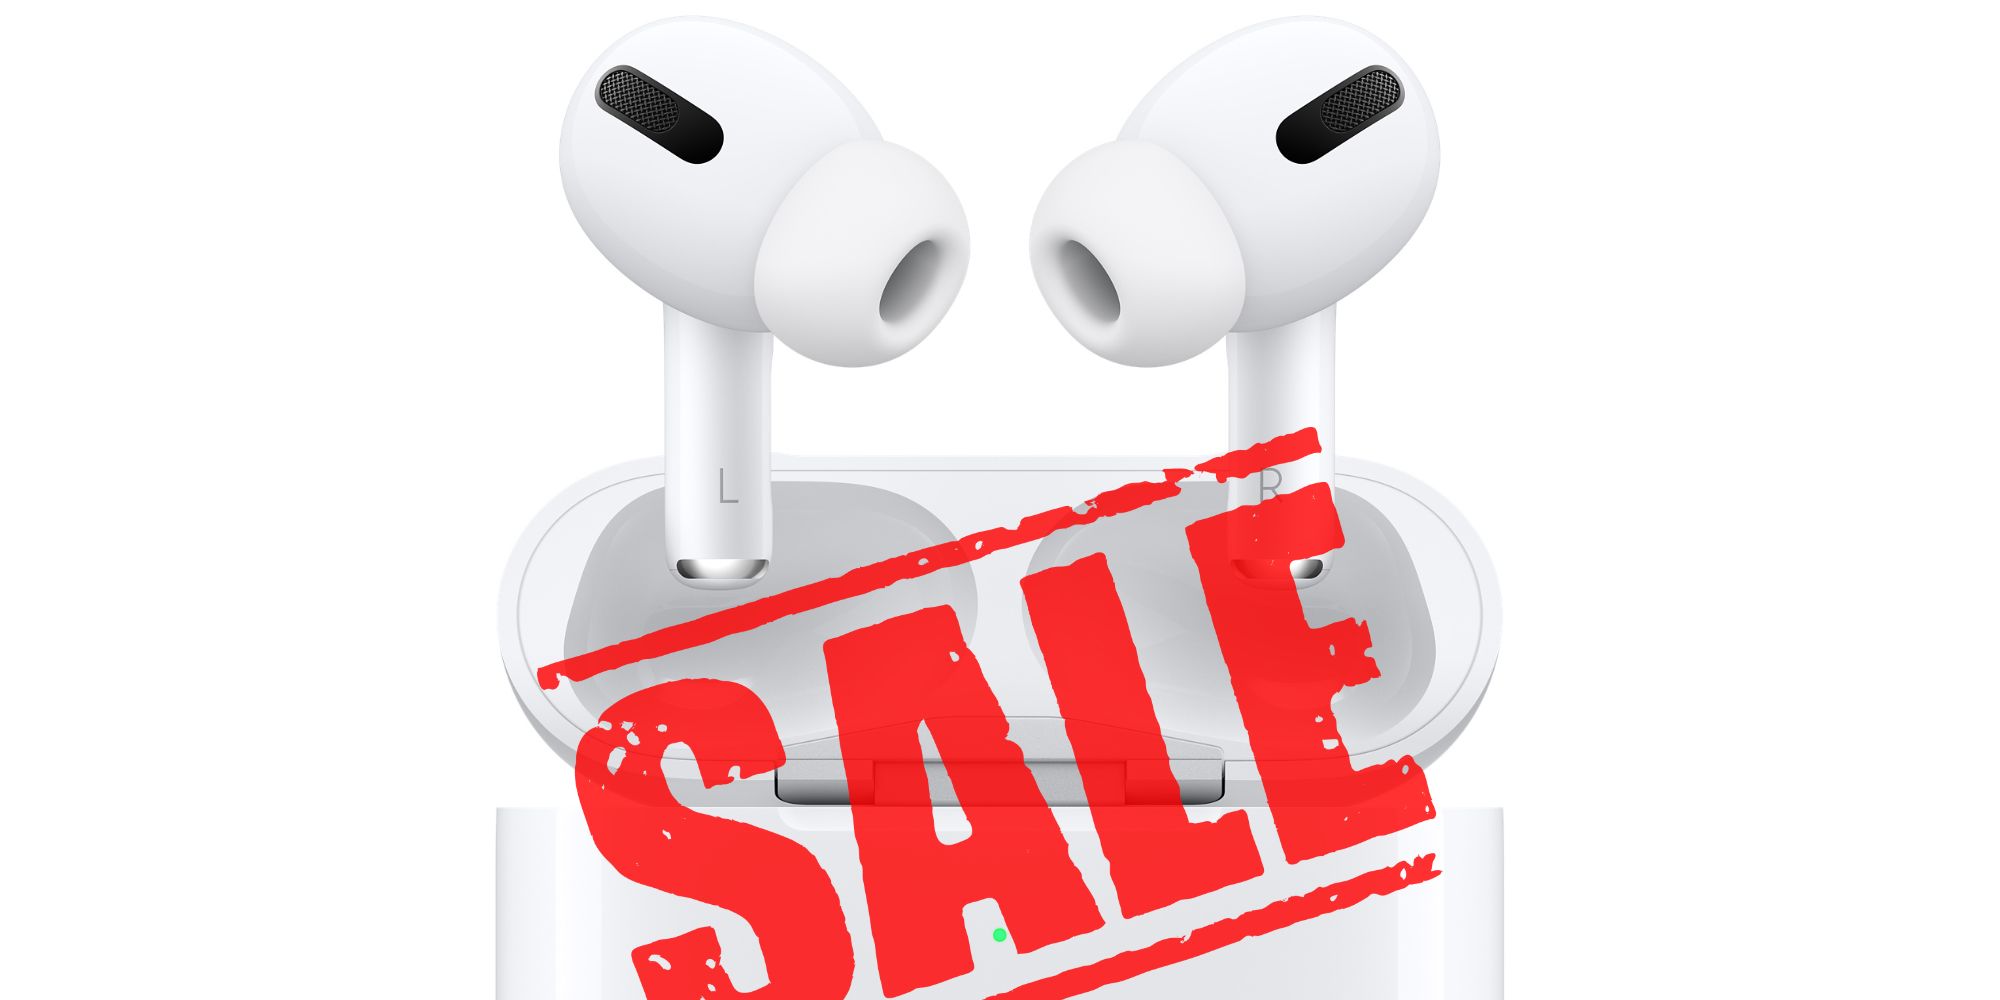 AirPods Pro Are At Their Lowest Price Ever Right Now For Black Friday